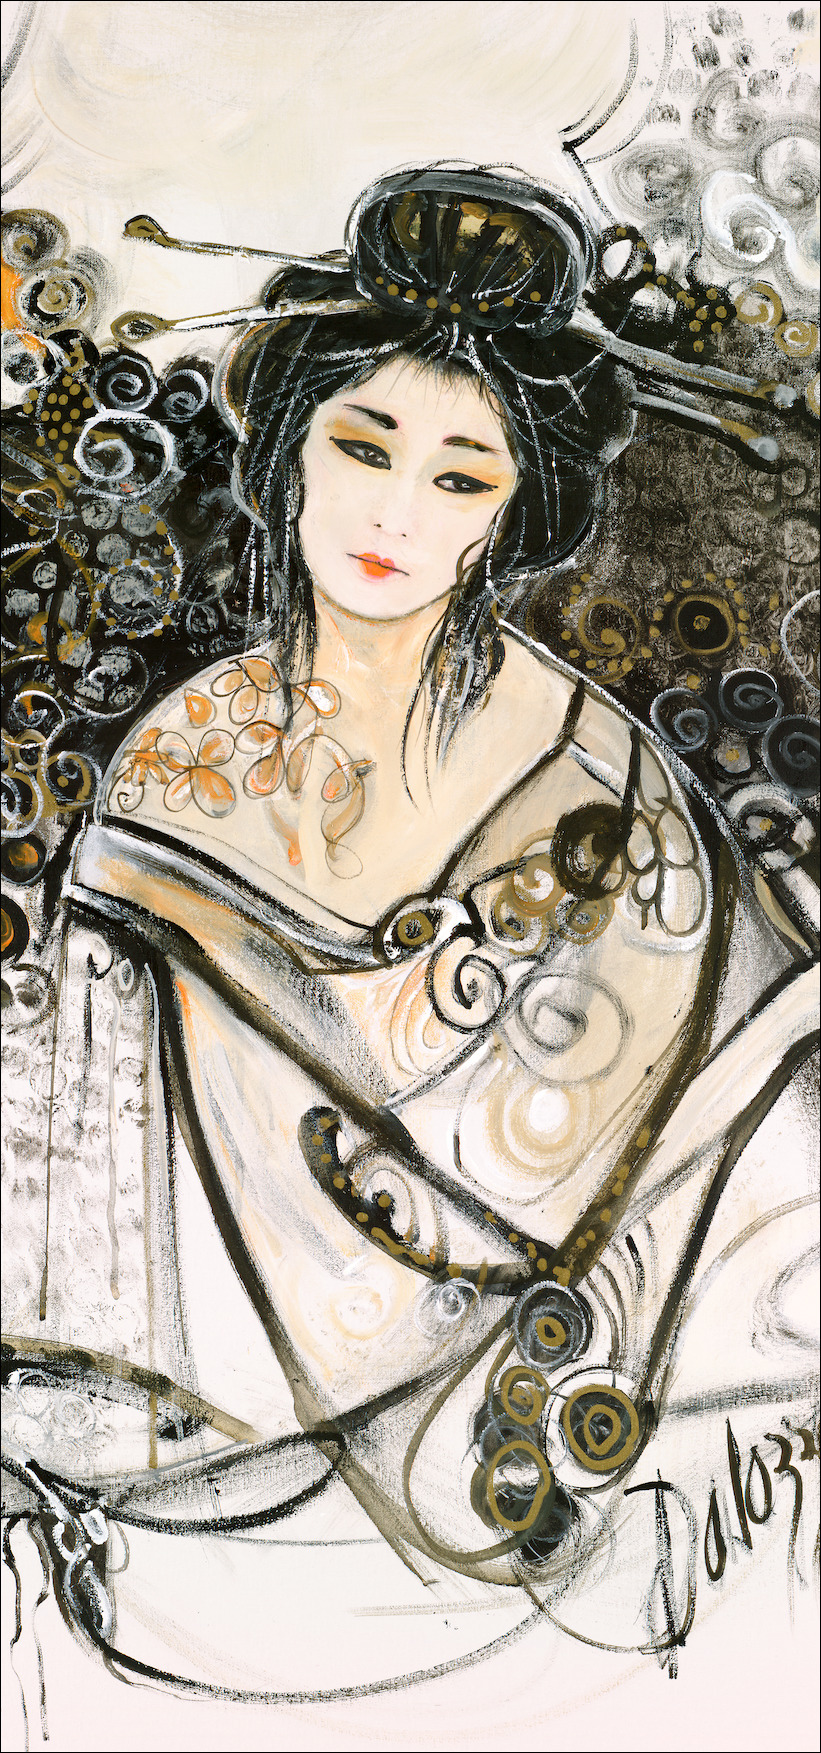 Figure "Geisha Girls" Reduced Vertical Panorama Variant From Lucette Dalozzo Artwork